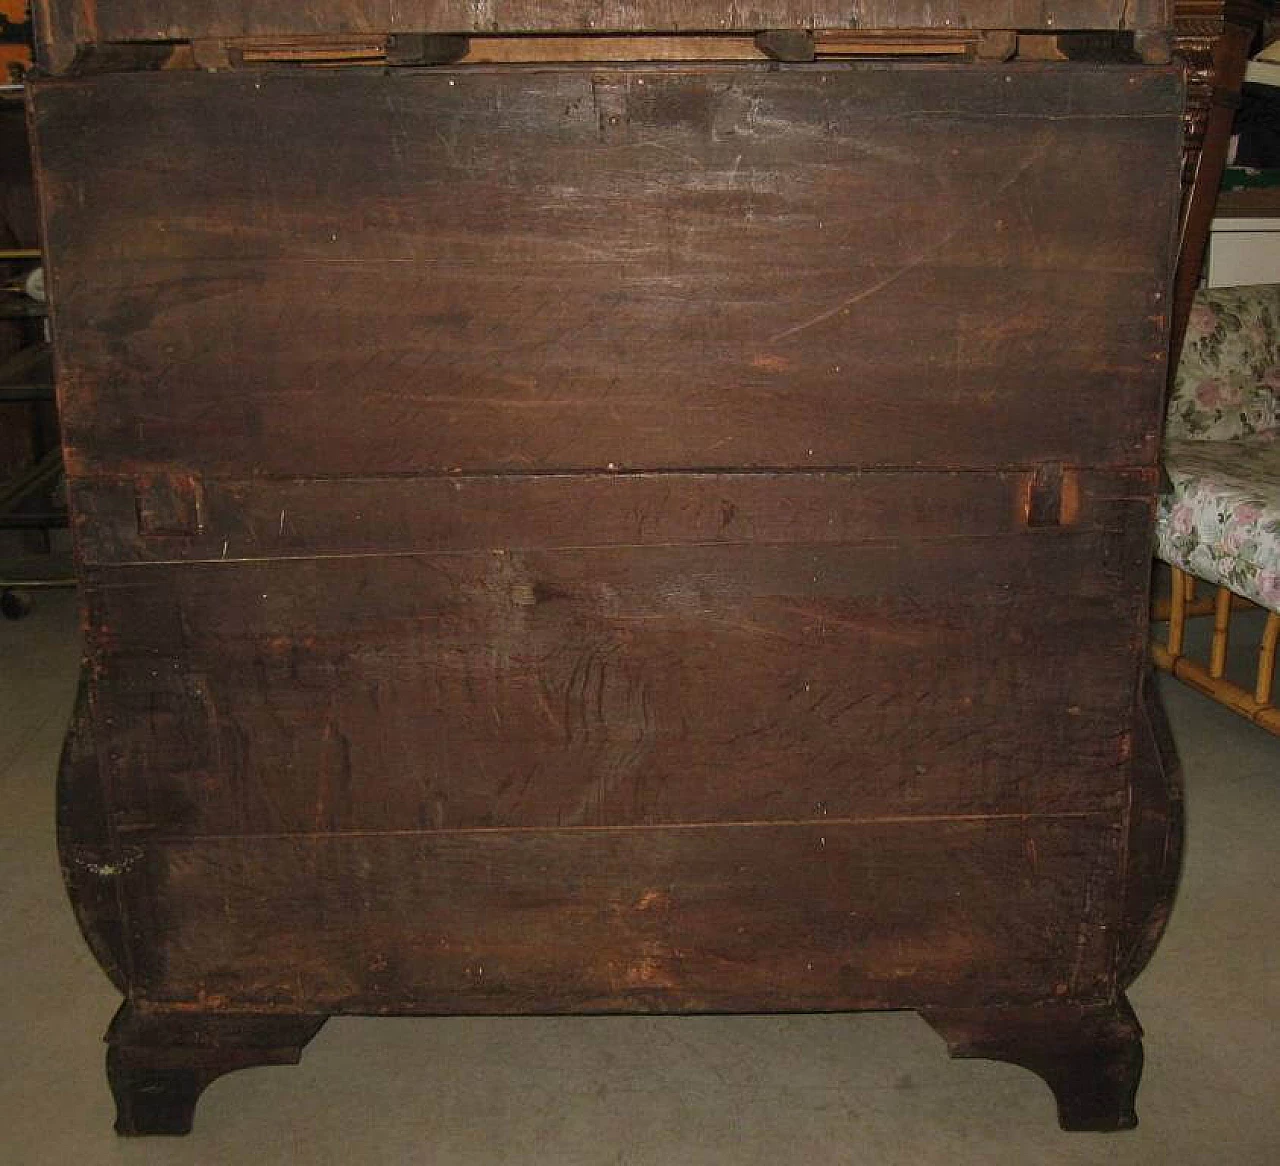 English folding table with riser, early 1800s 1210186